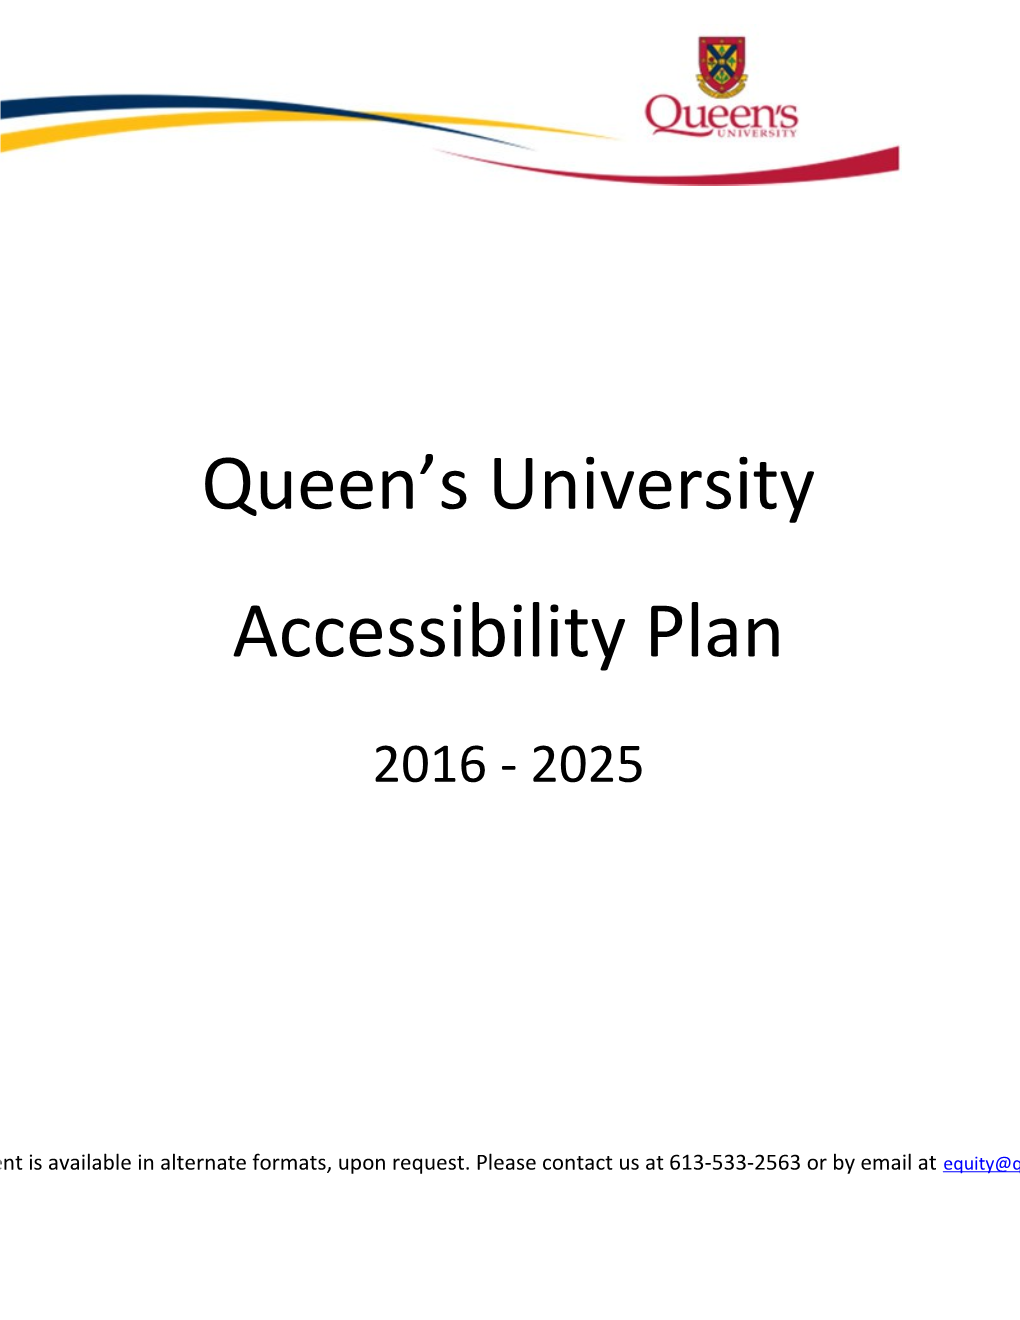 Accessibility Plan Multi-Year 2016-2025